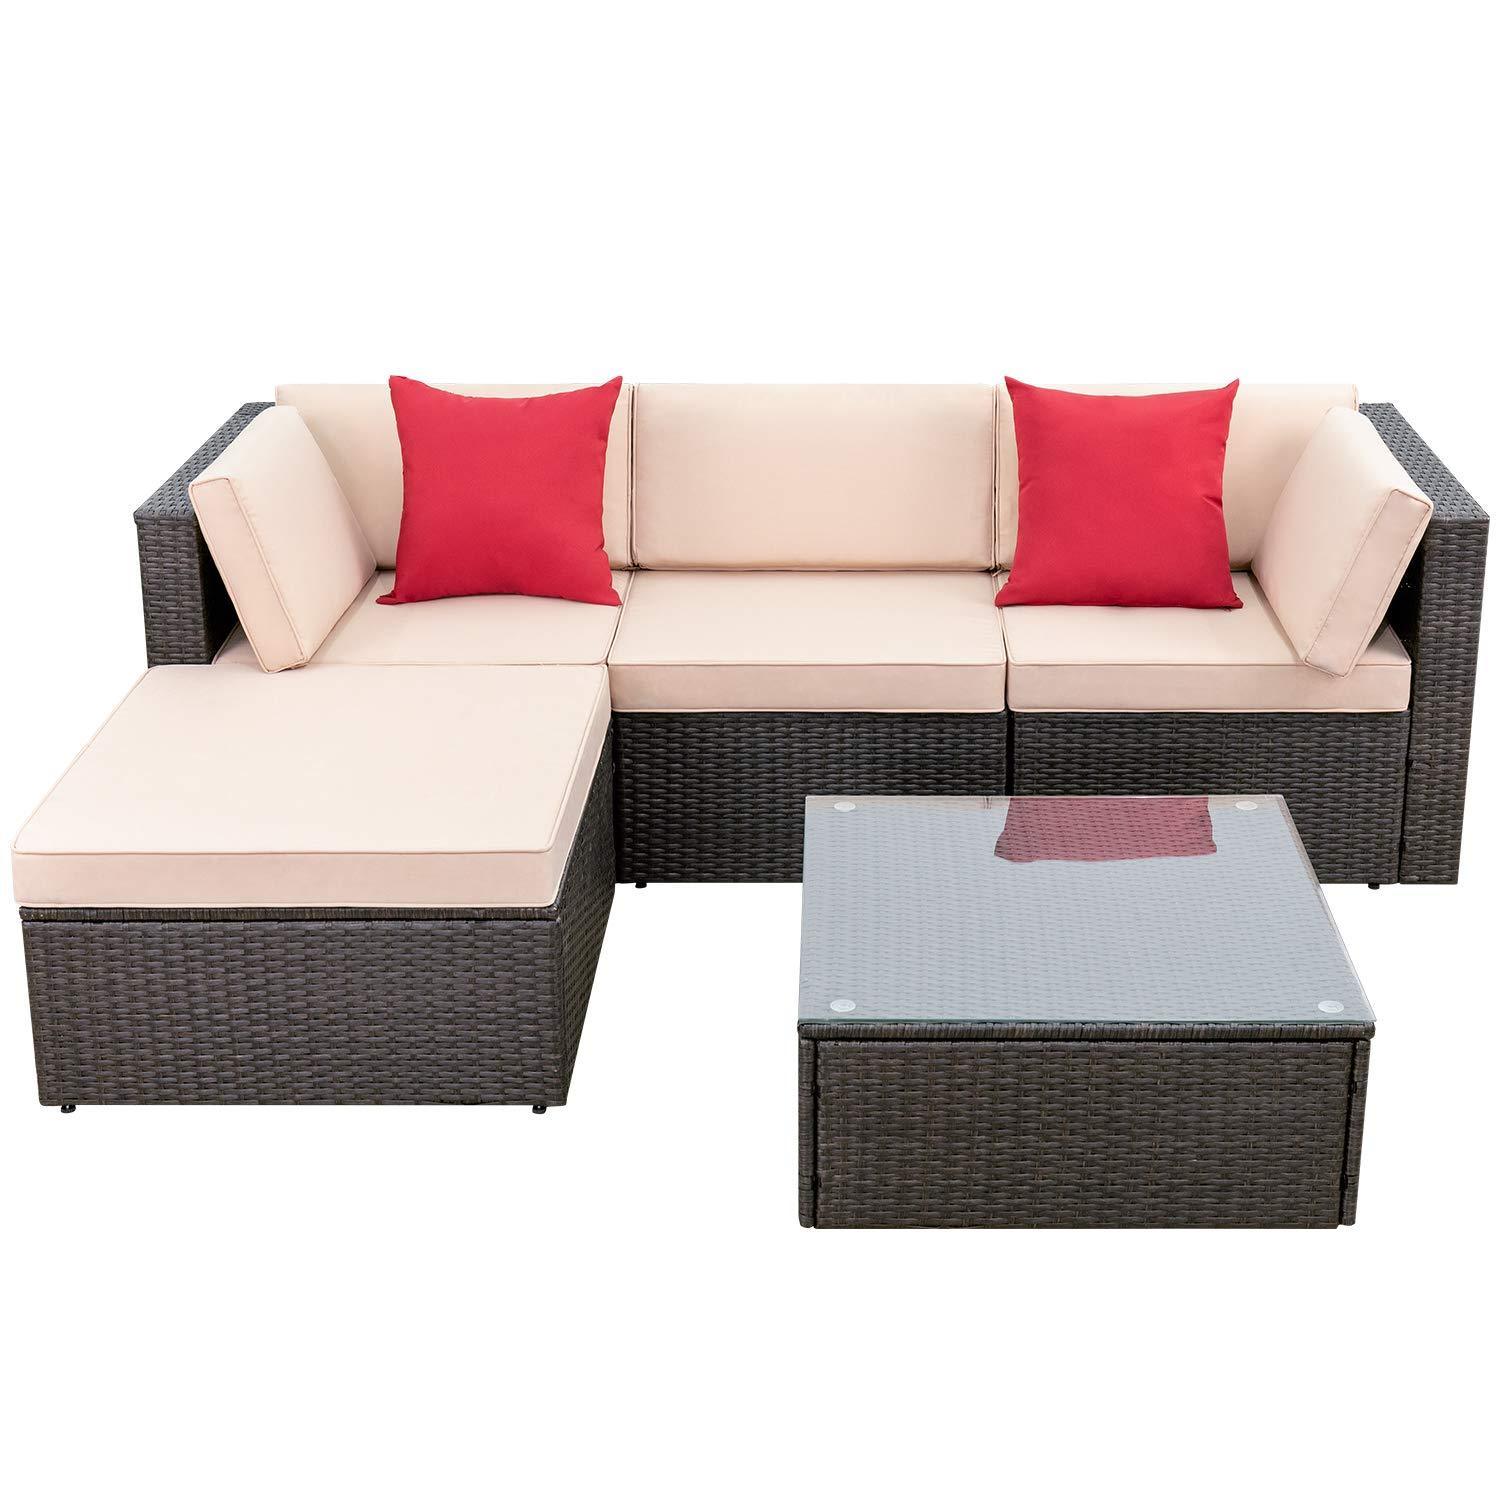 Walnew 5 Pieces Outdoor Rattan Sectional Sofa